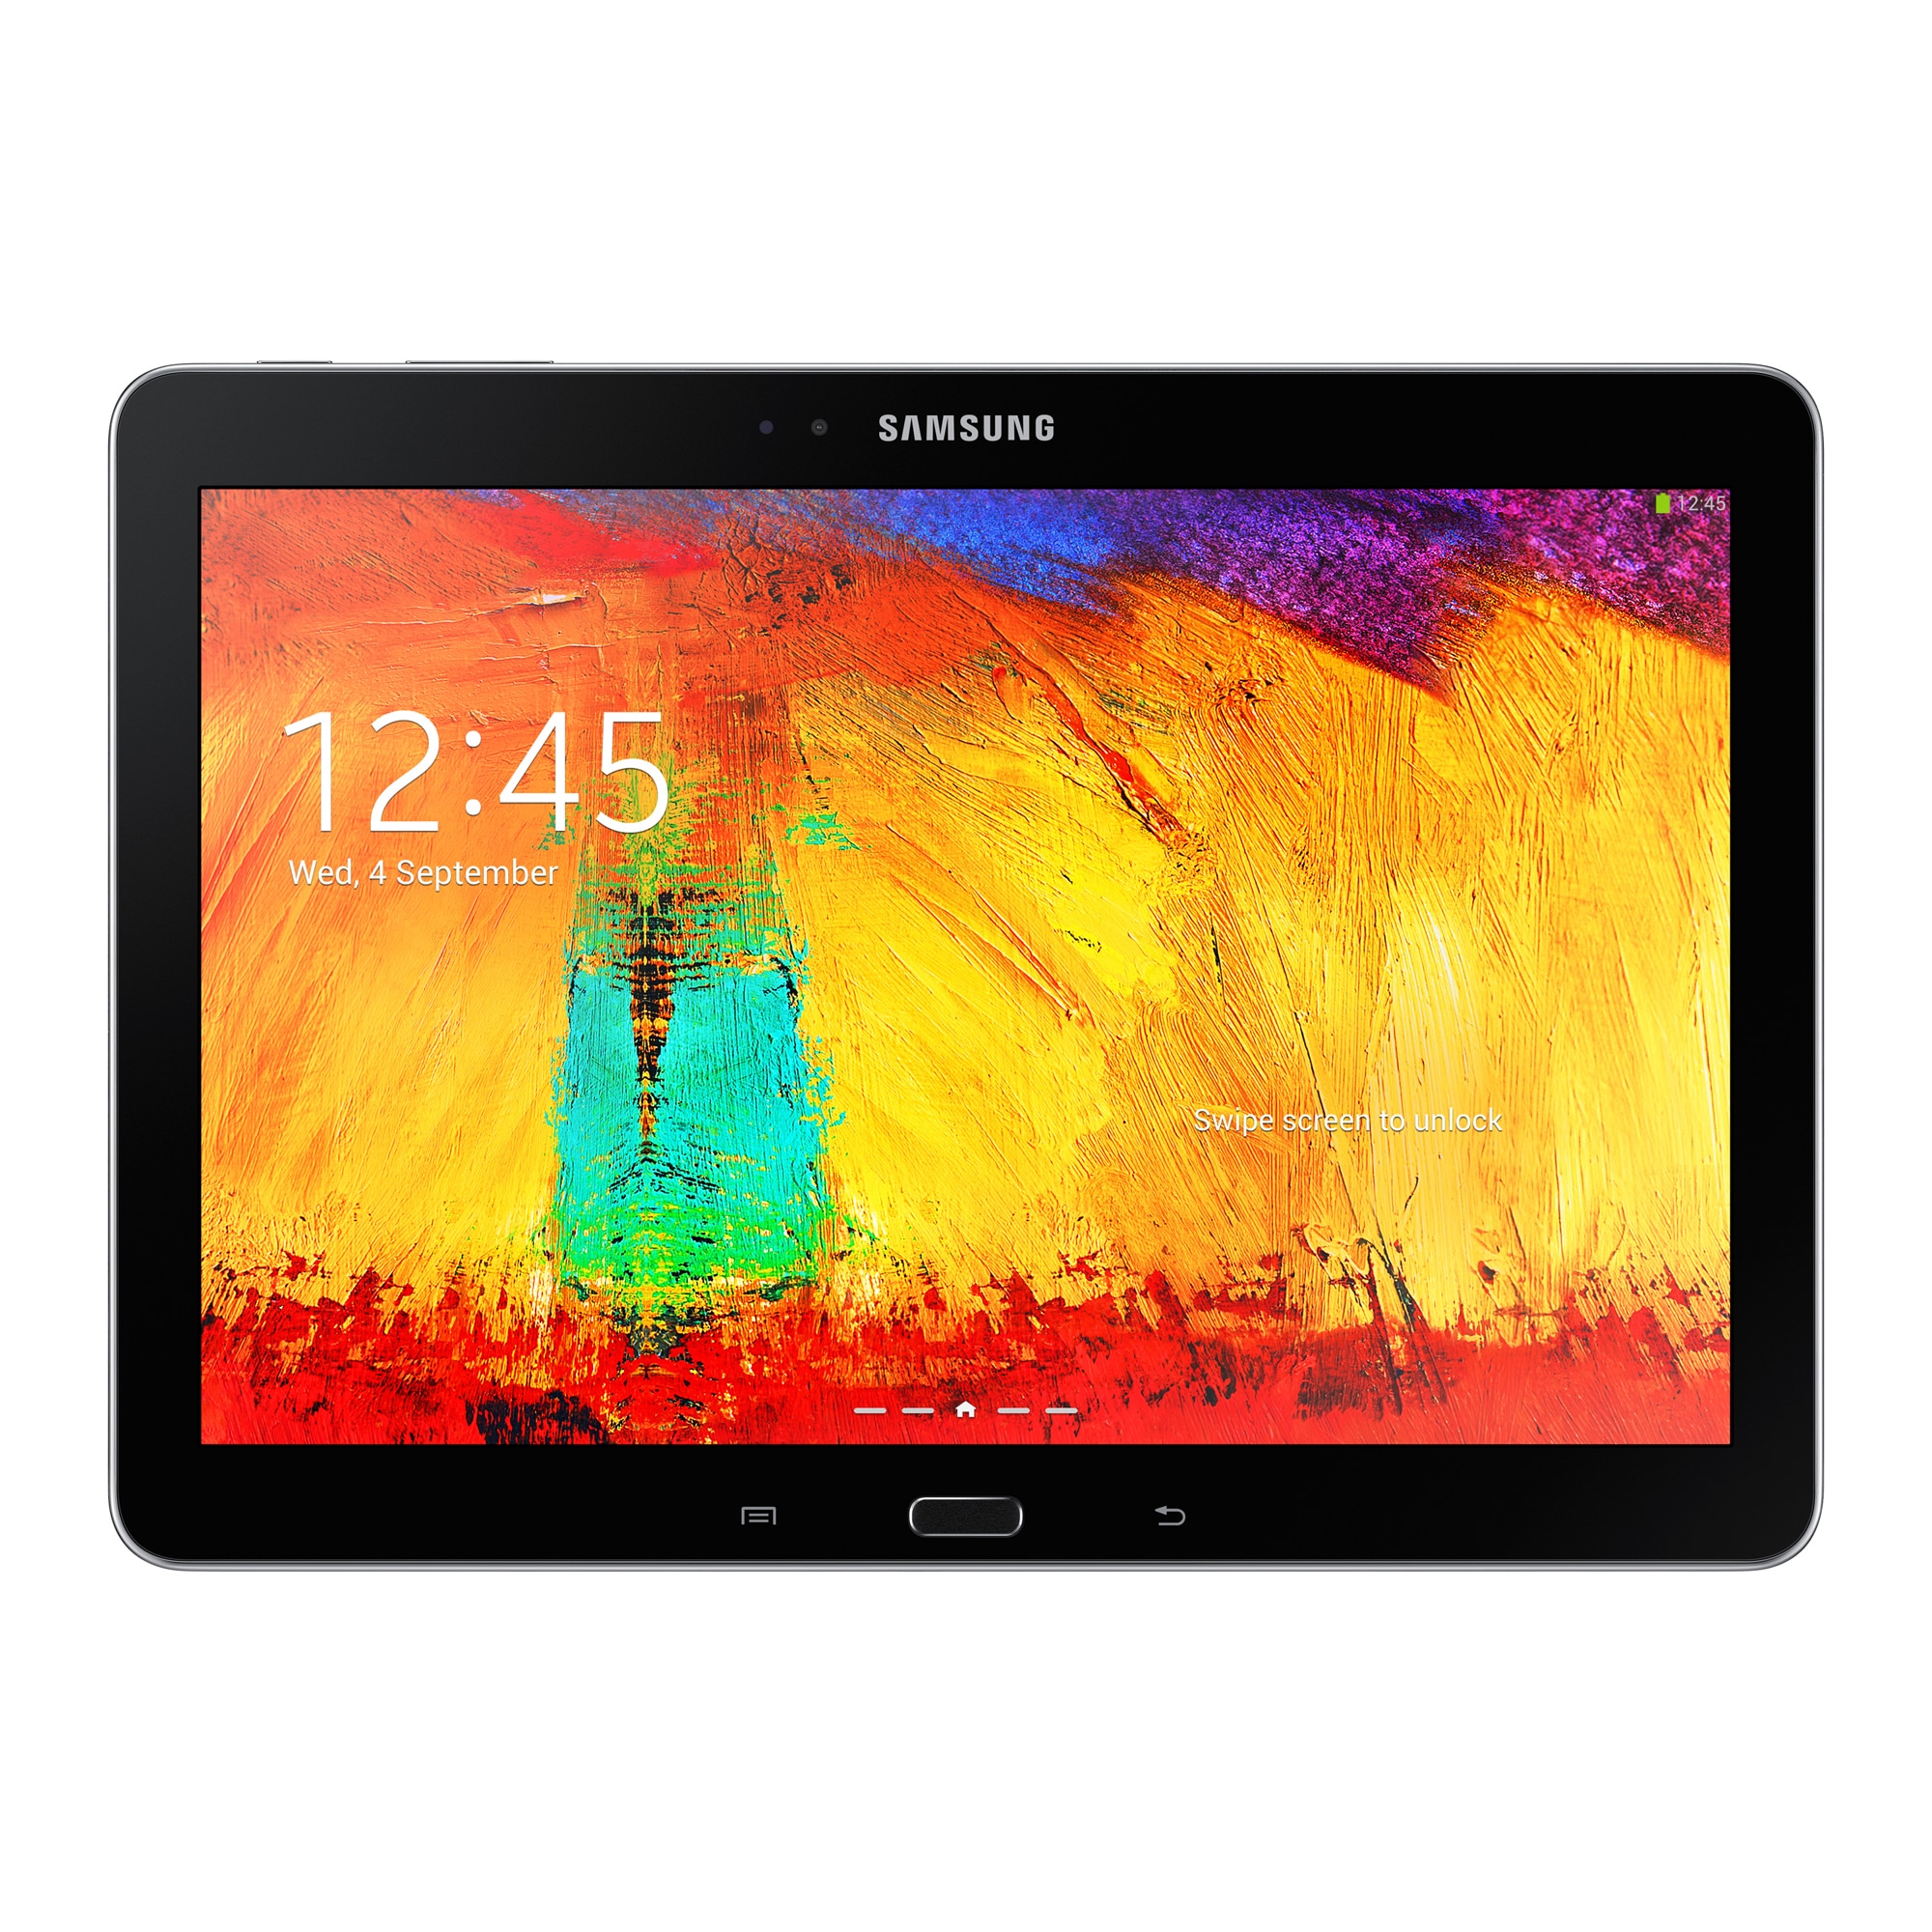 Imperialism famine Any time Tableta Samsung Galaxy Note 10.1", 16GB, Wi-Fi, 3G, 4G, Bluetooth 4.0,  Android 4.3, Black - eMAG.ro